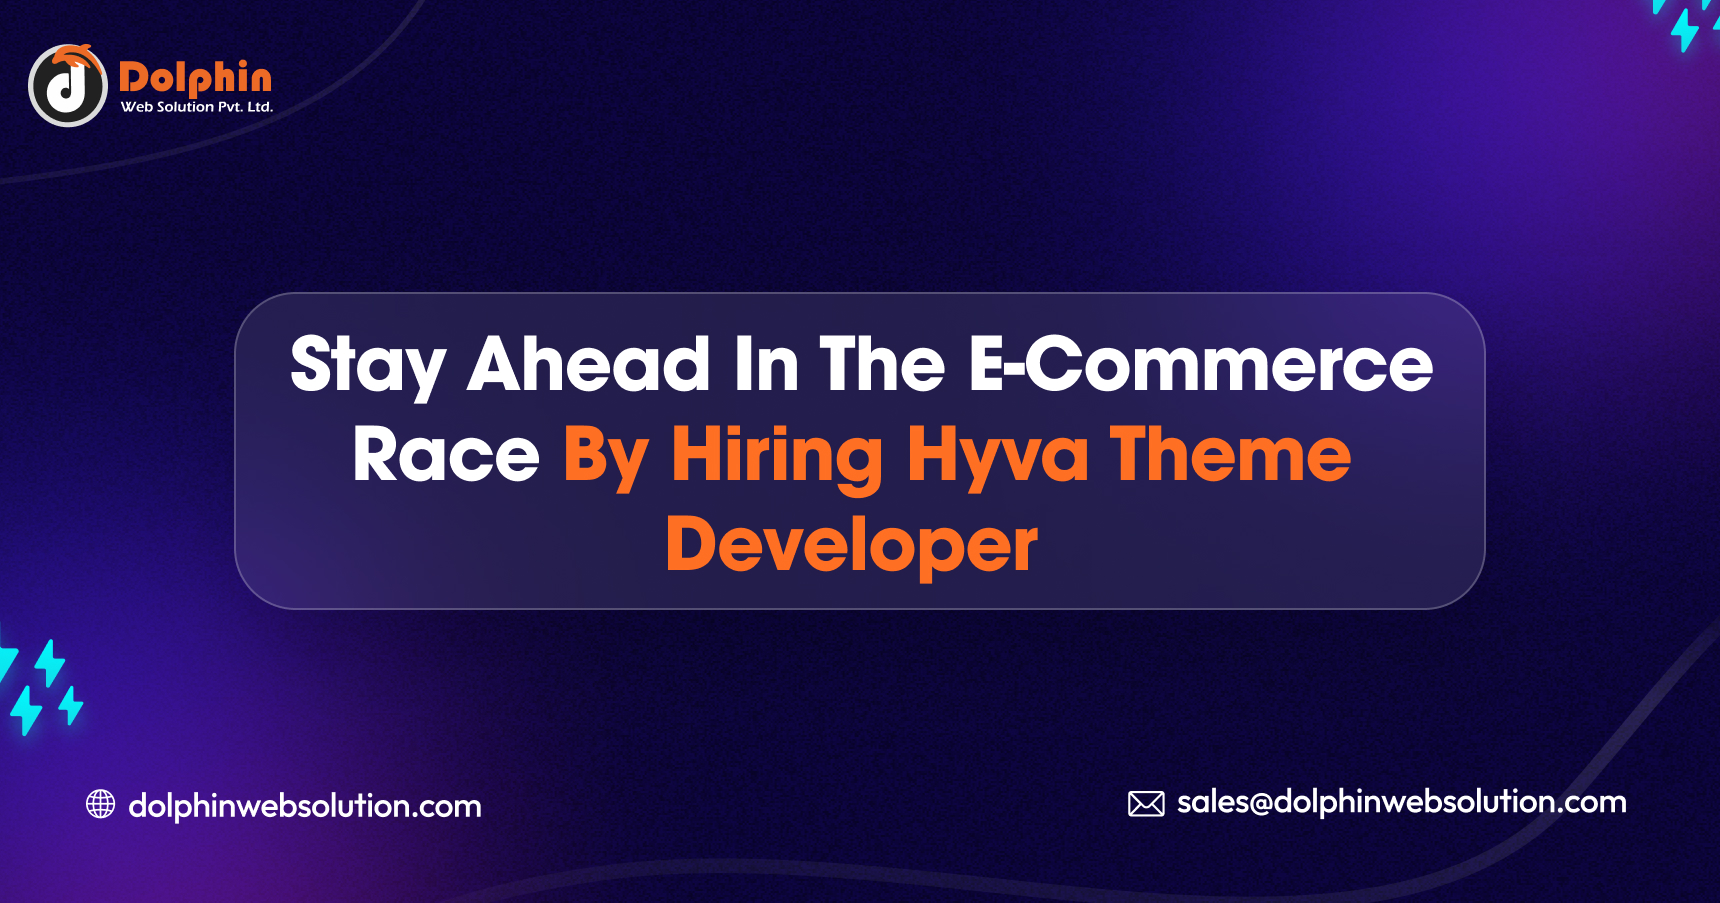 Hyvä Magento Theme: Stay Ahead In The E-Commerce Race By Hiring Hyva Theme Developer - Dolphin Web Solution